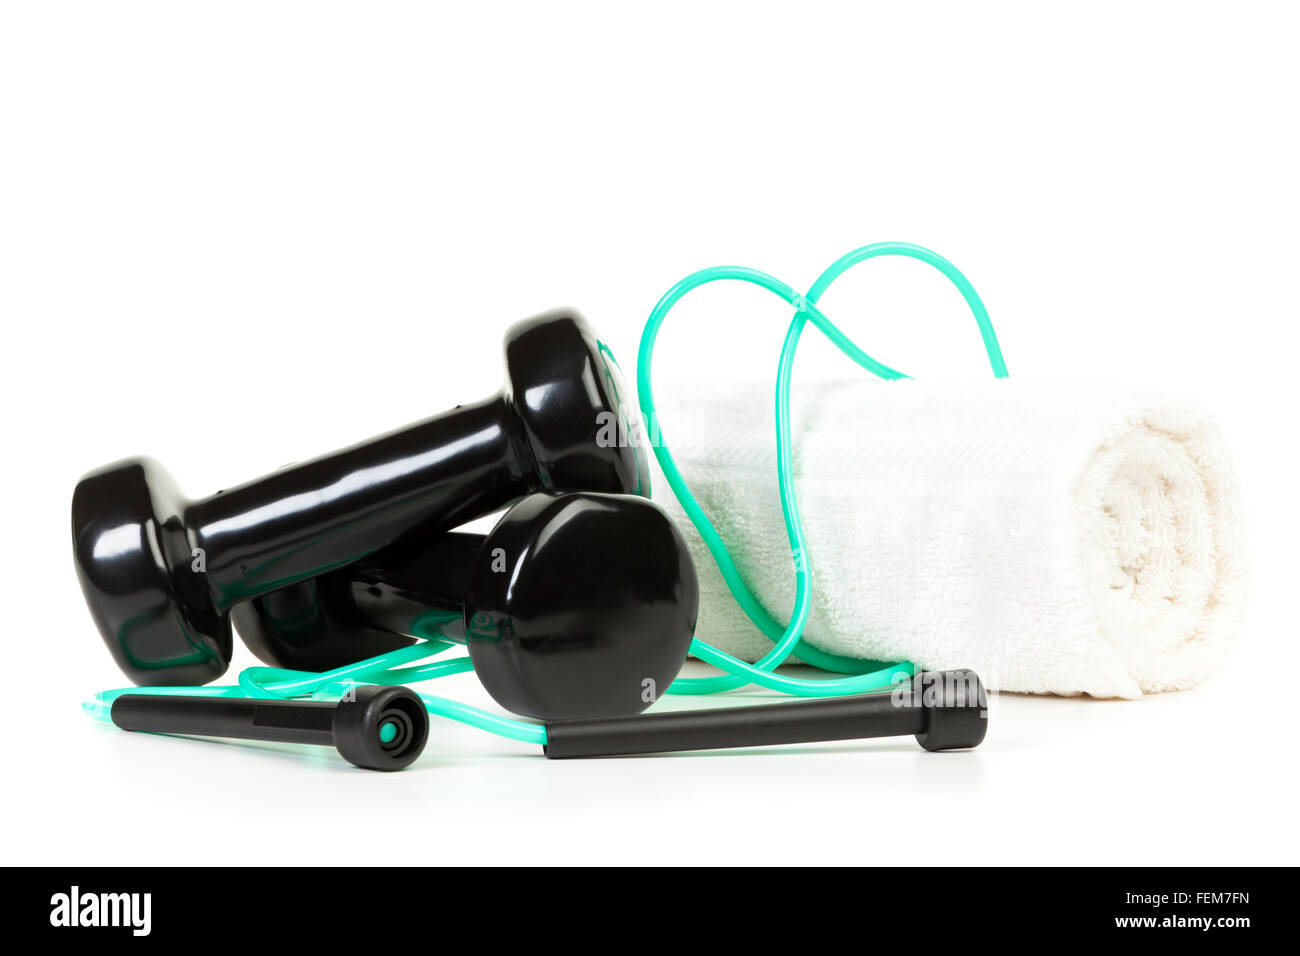 body exercise equipment - dumbbells, skipping rope and towel on white background Stock Photo